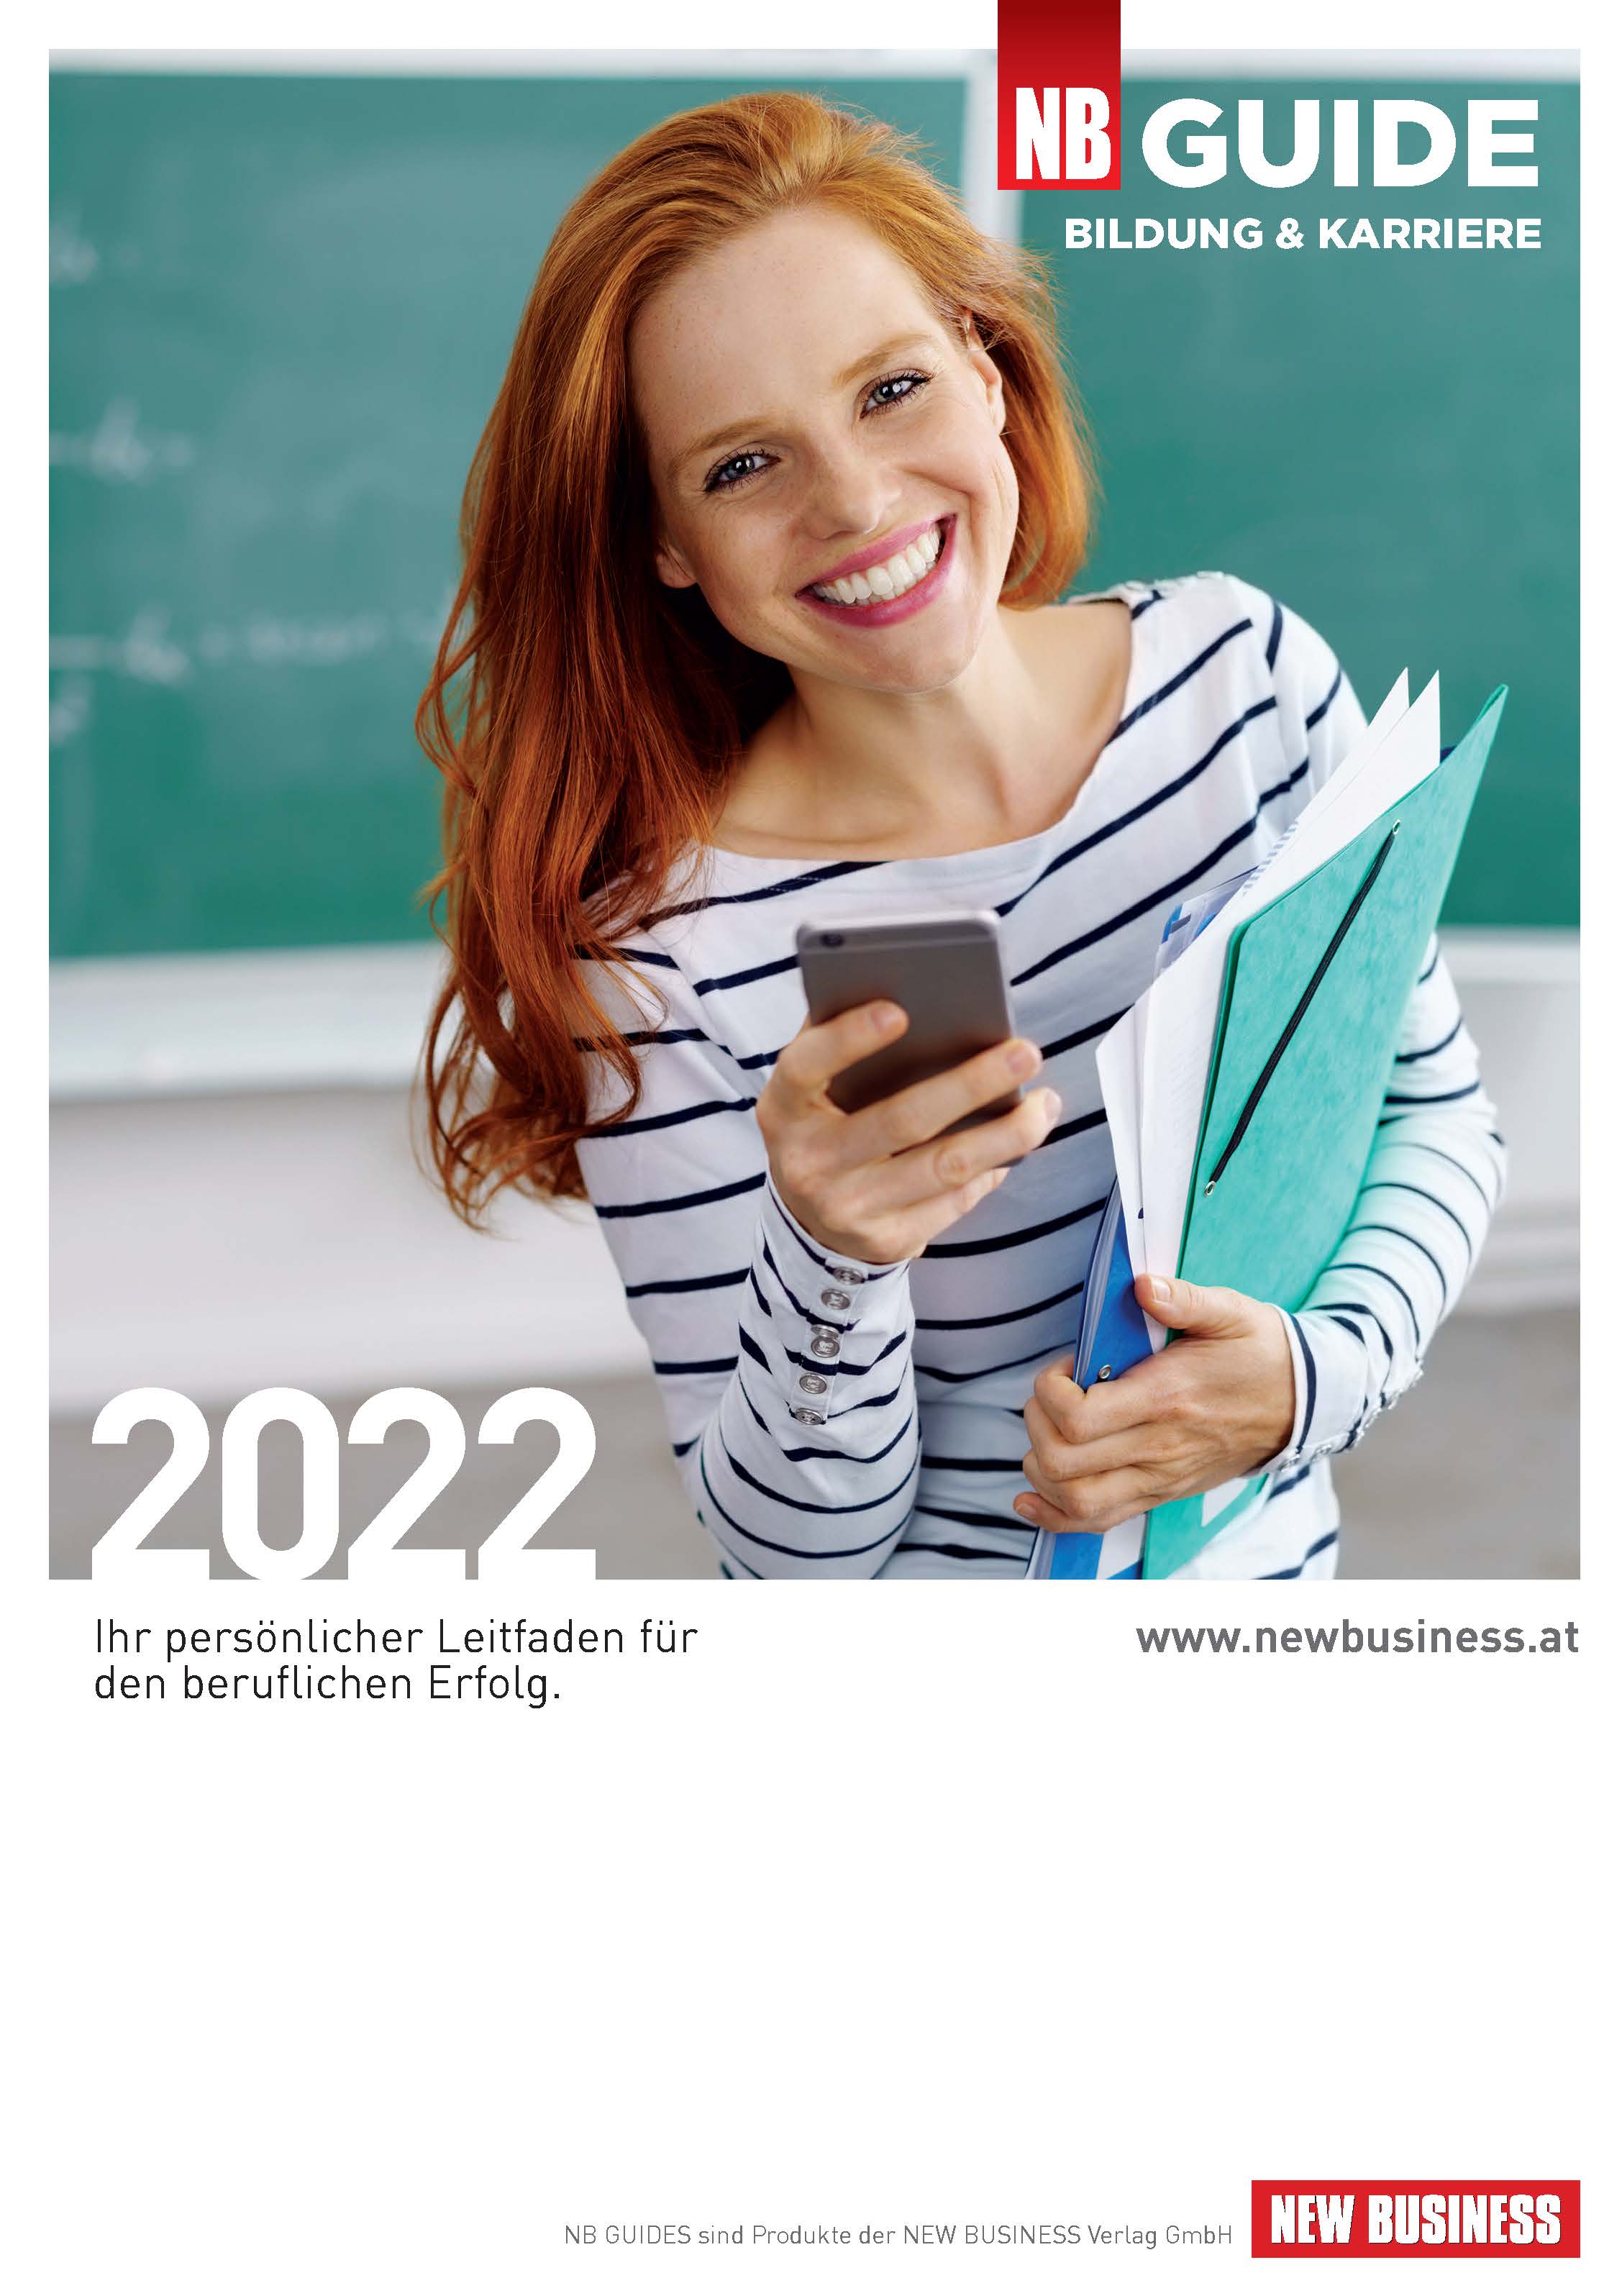 Cover: NEW BUSINESS Guides - BILDUNGS- & KARRIERE-GUIDE 2022